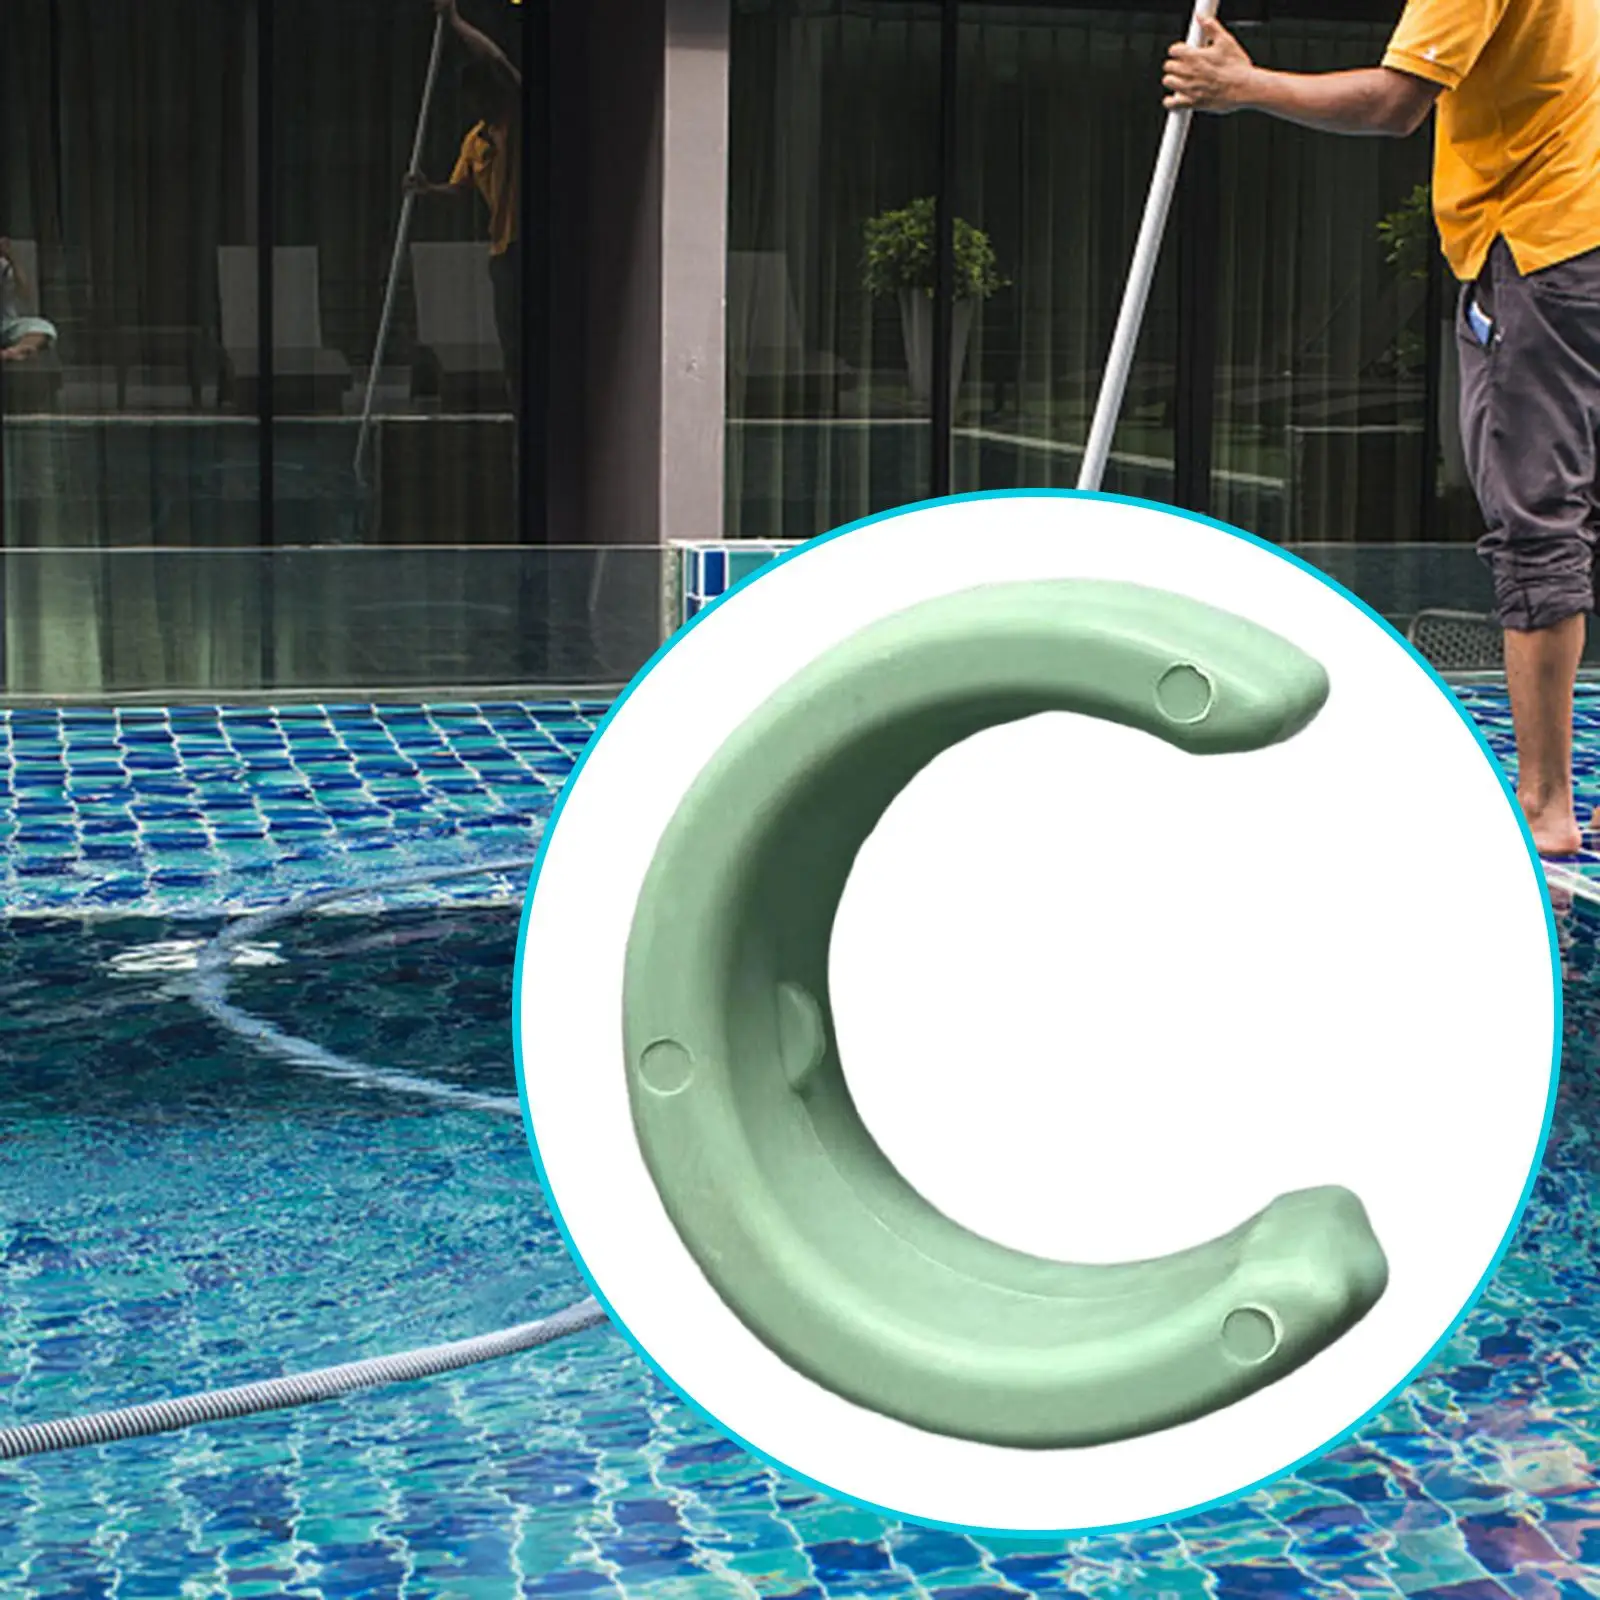 Pool Cleaner Hose Weight for K12454 Keep The Crawler Hose under Water Easy to Use Durable Automatic Pool Cleaner Hose Weight